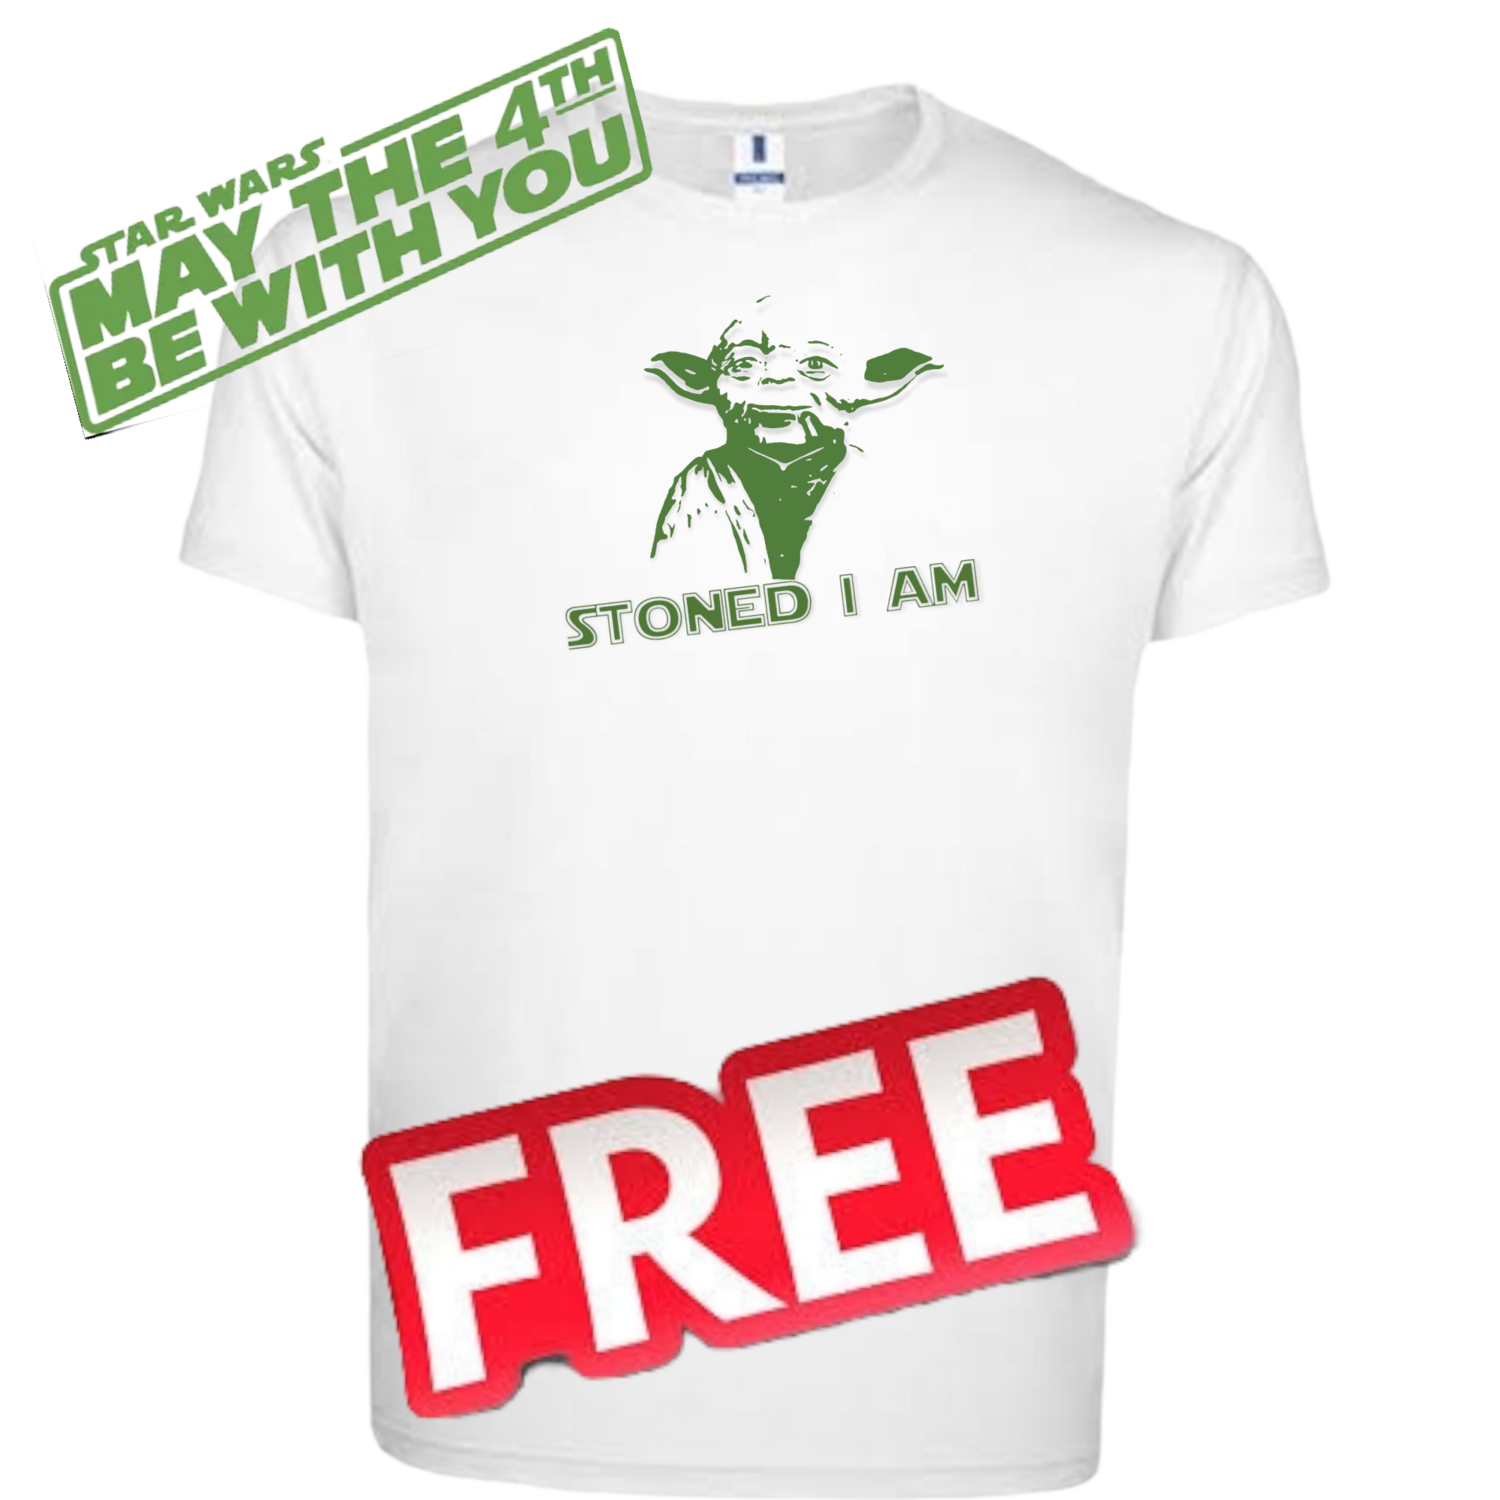 FREE T SHIRT may the 4th  yoda EDITION 
Only small to xl is free anything bigger  is a lil extra